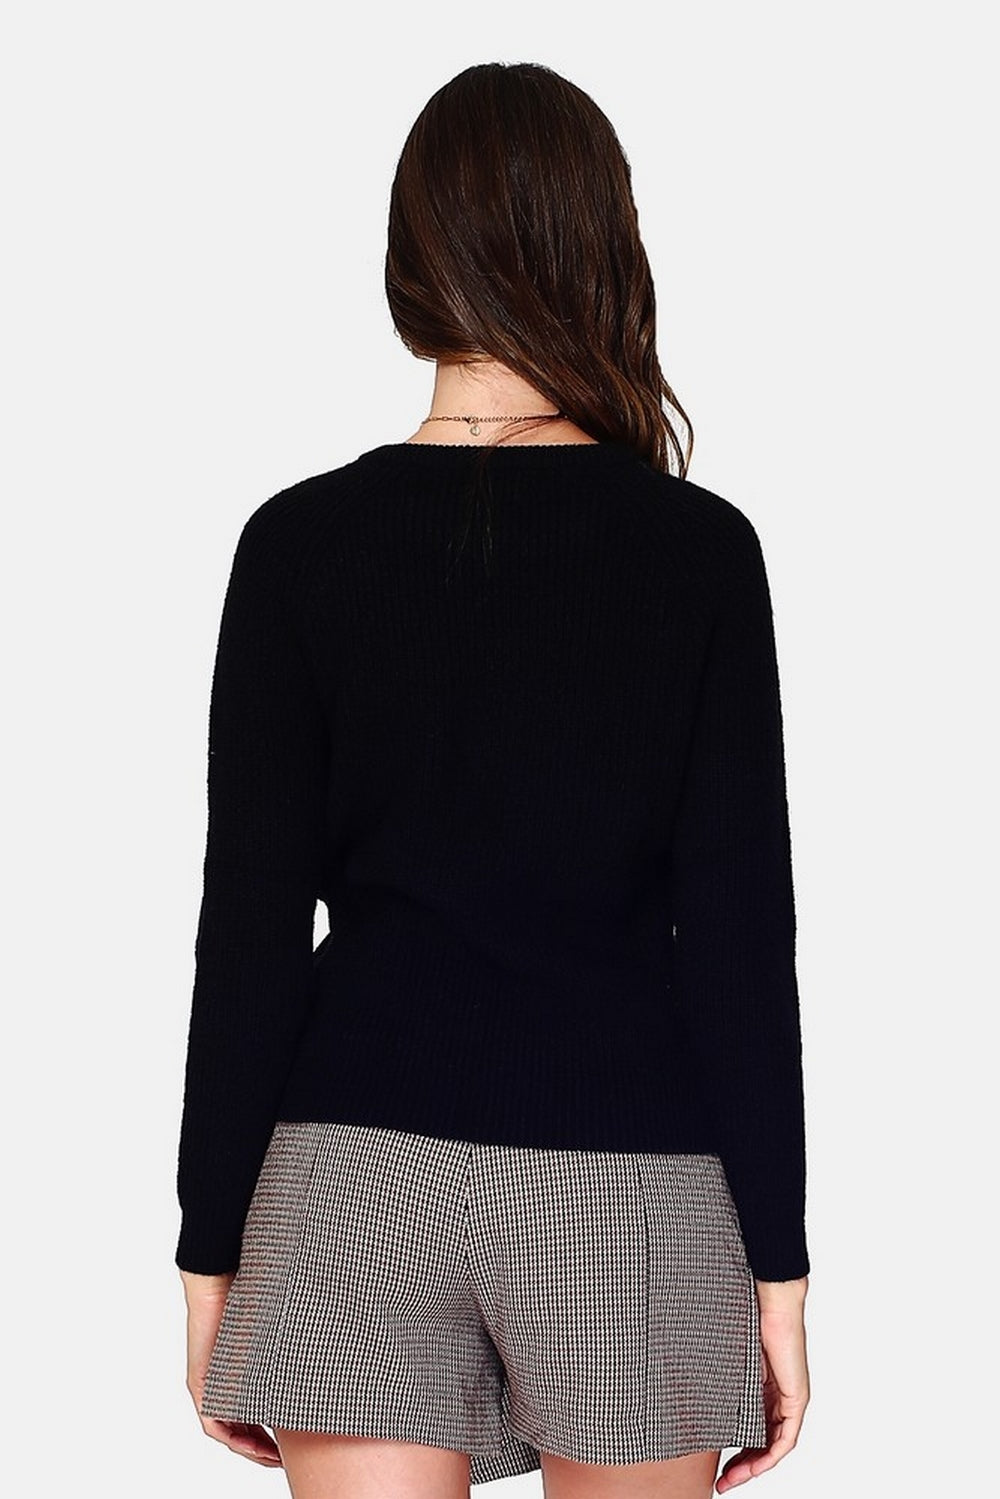 High neck sweater closed by a shoulder button placket, pearl rib knitting